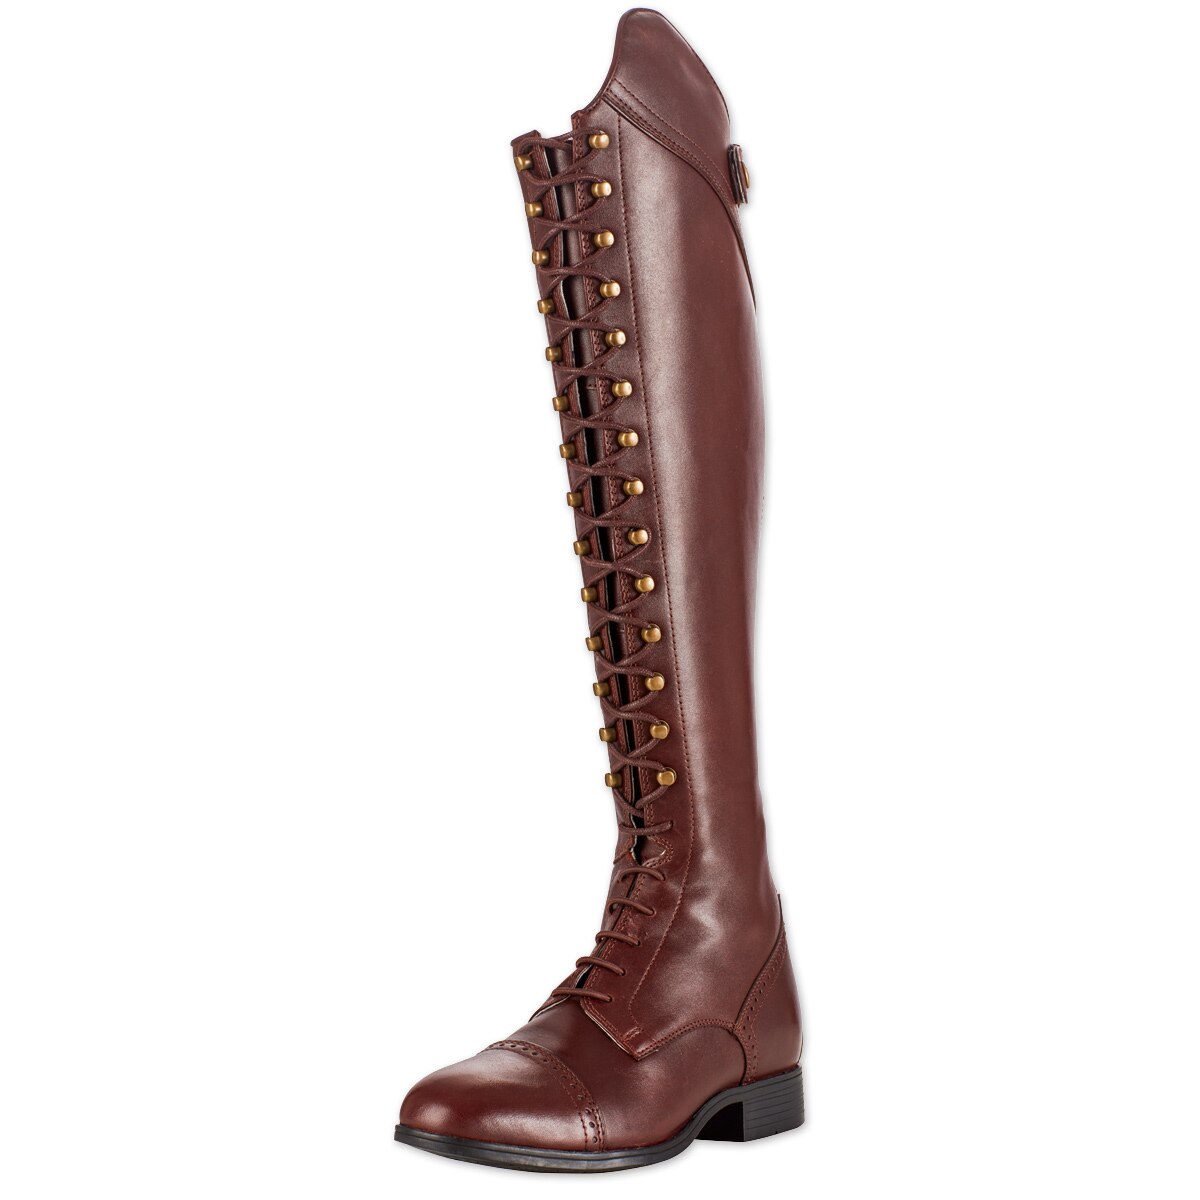 Ariat Capriole Lace Up Dressage Boot 